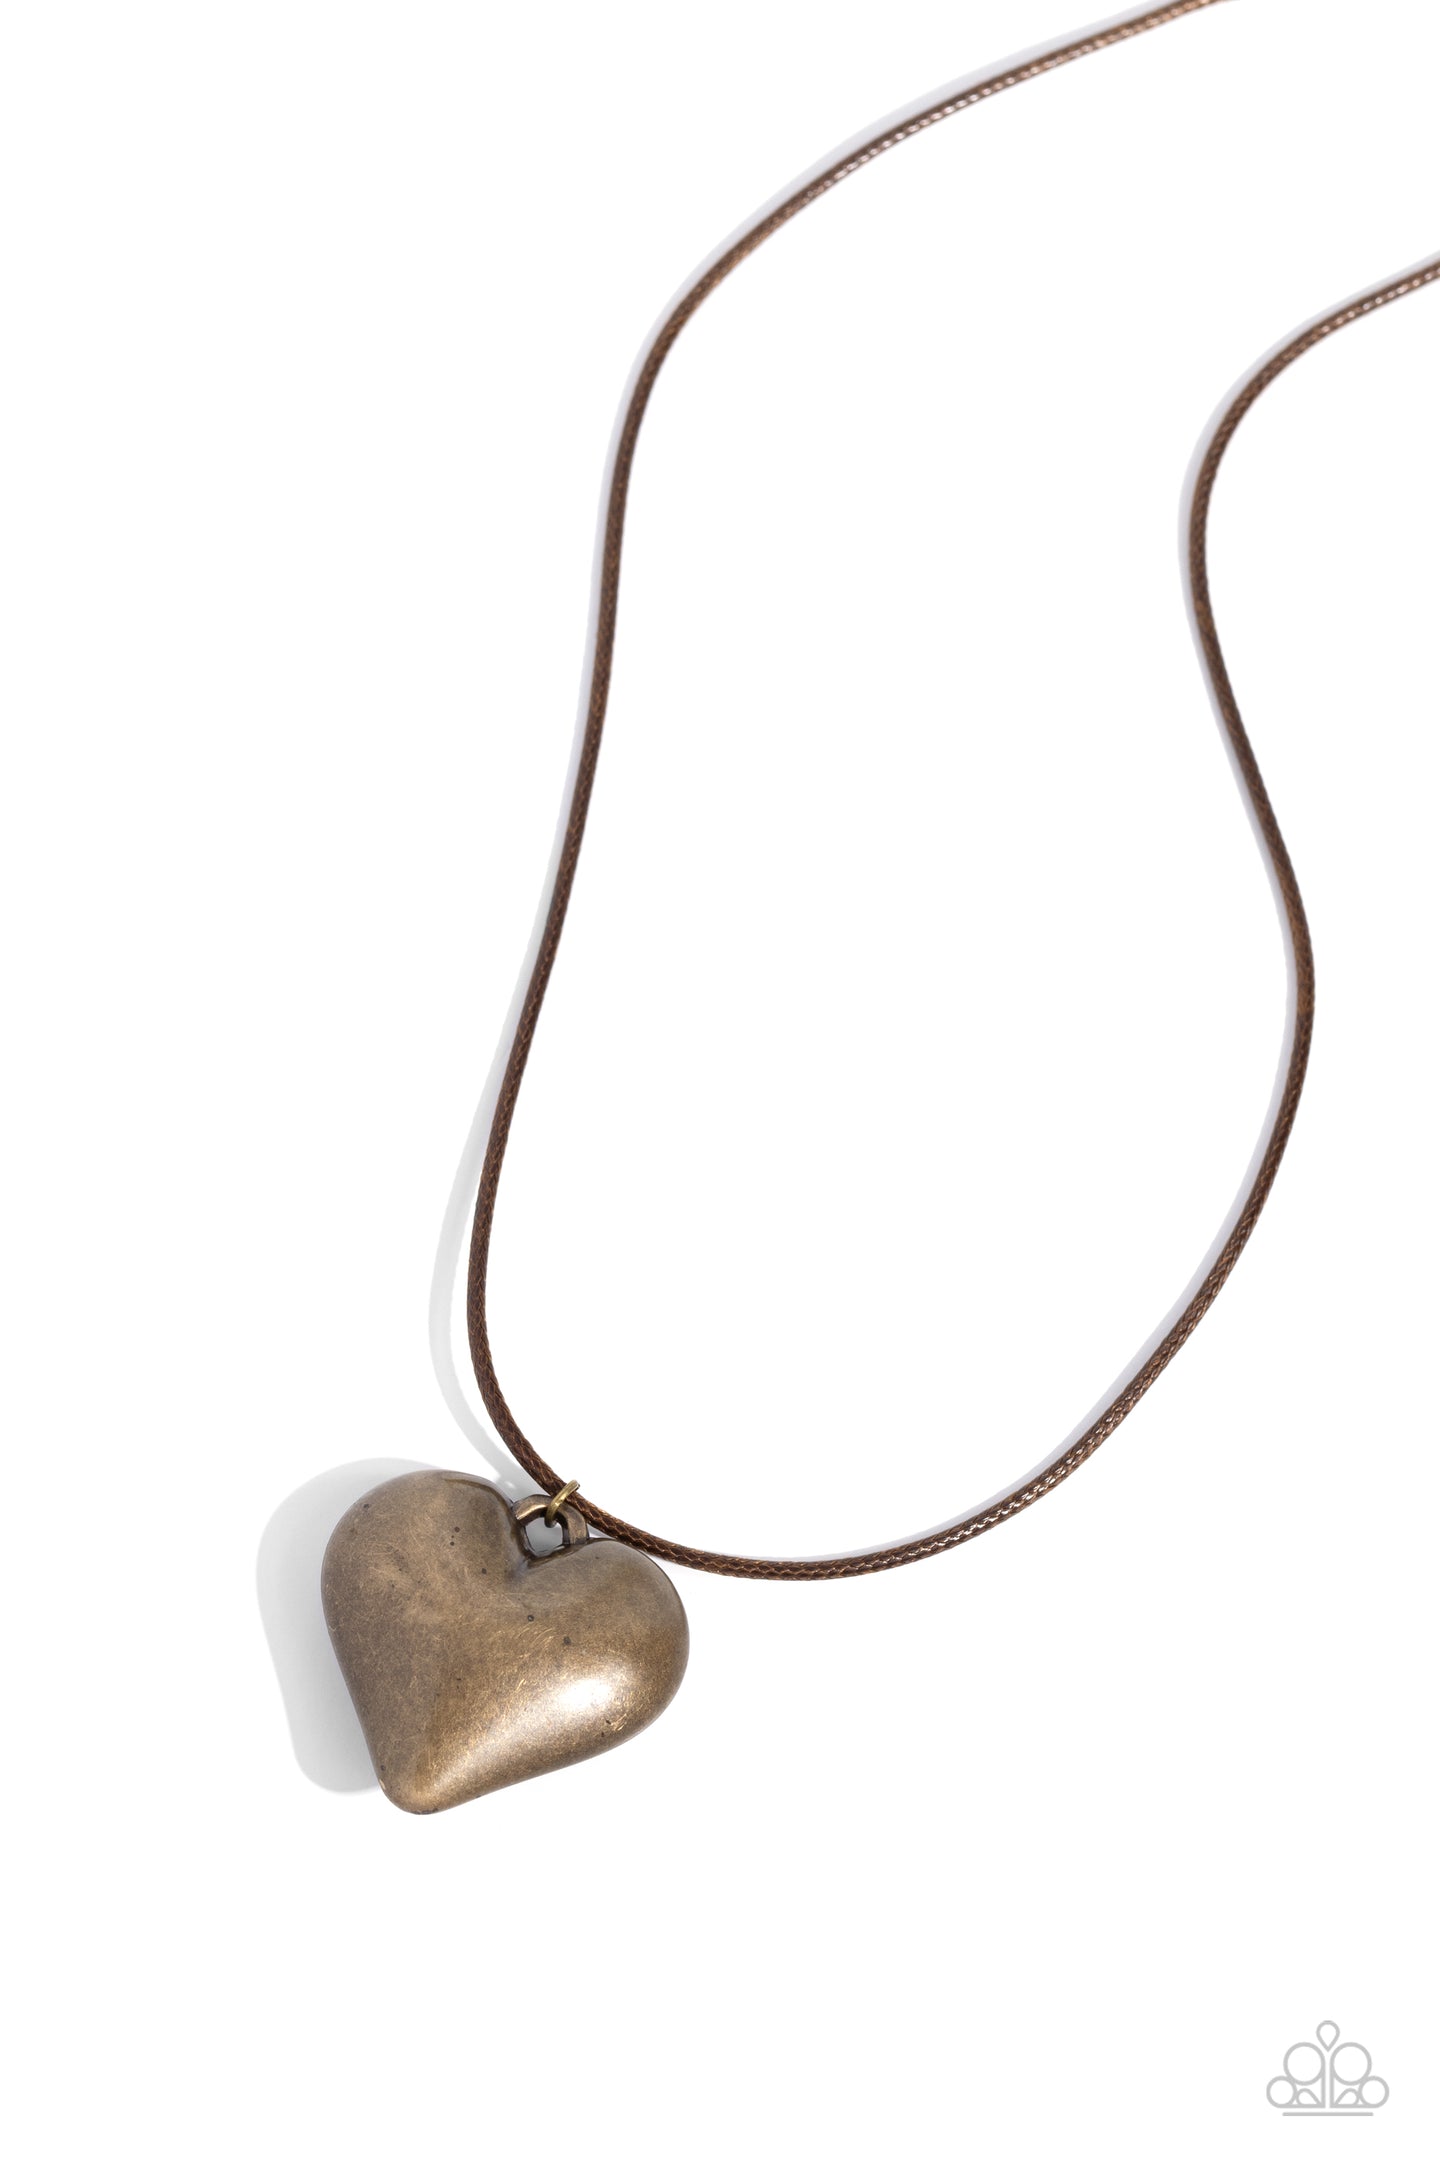 CORDED Love - Brass necklace A046(2)